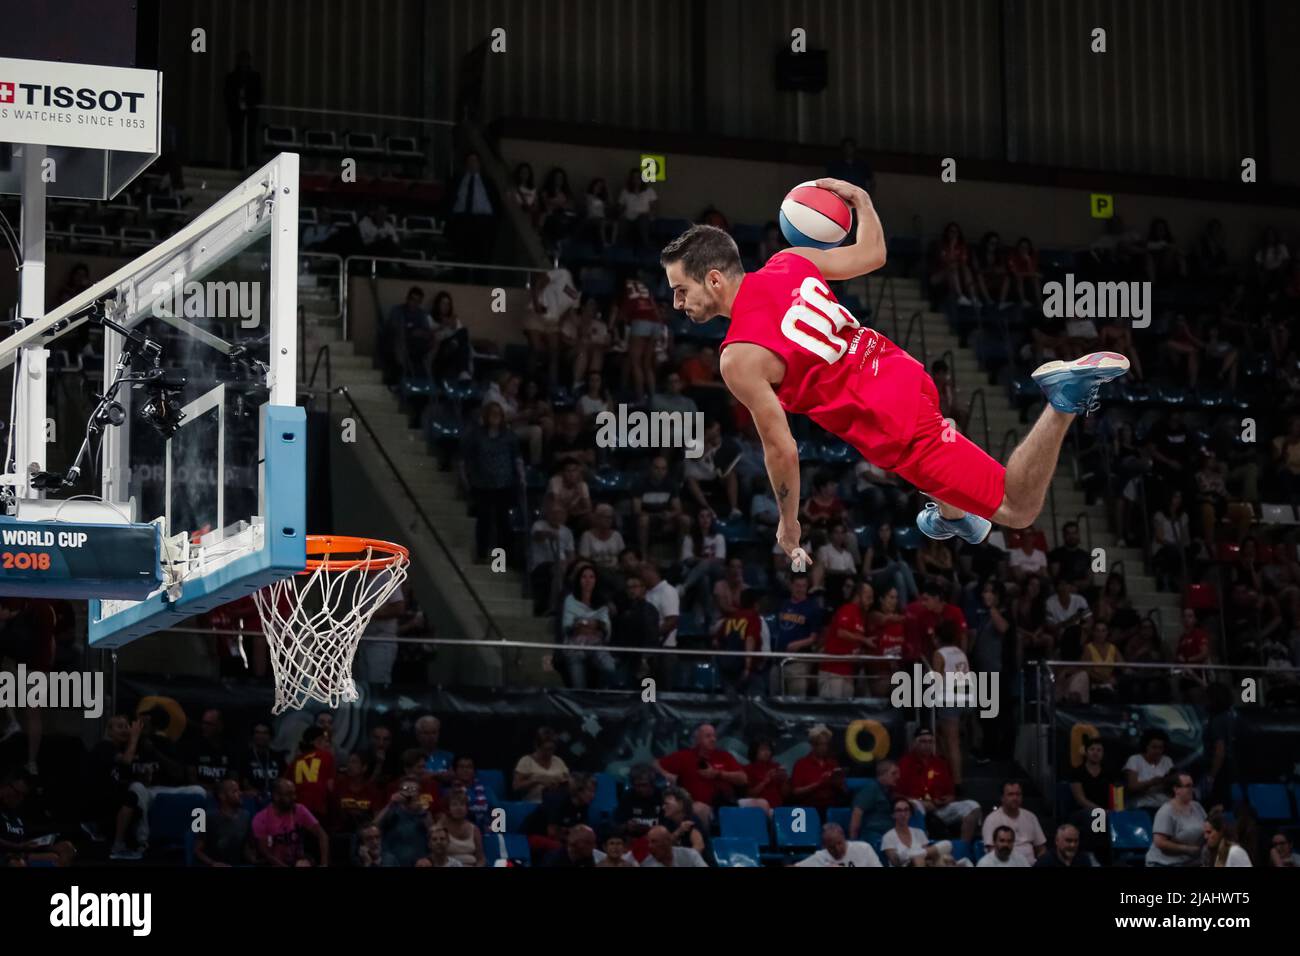 Tenerife, Spain, September 28, 2018:basketball player jumps over the basket during an acrobatic basketball show Stock Photo